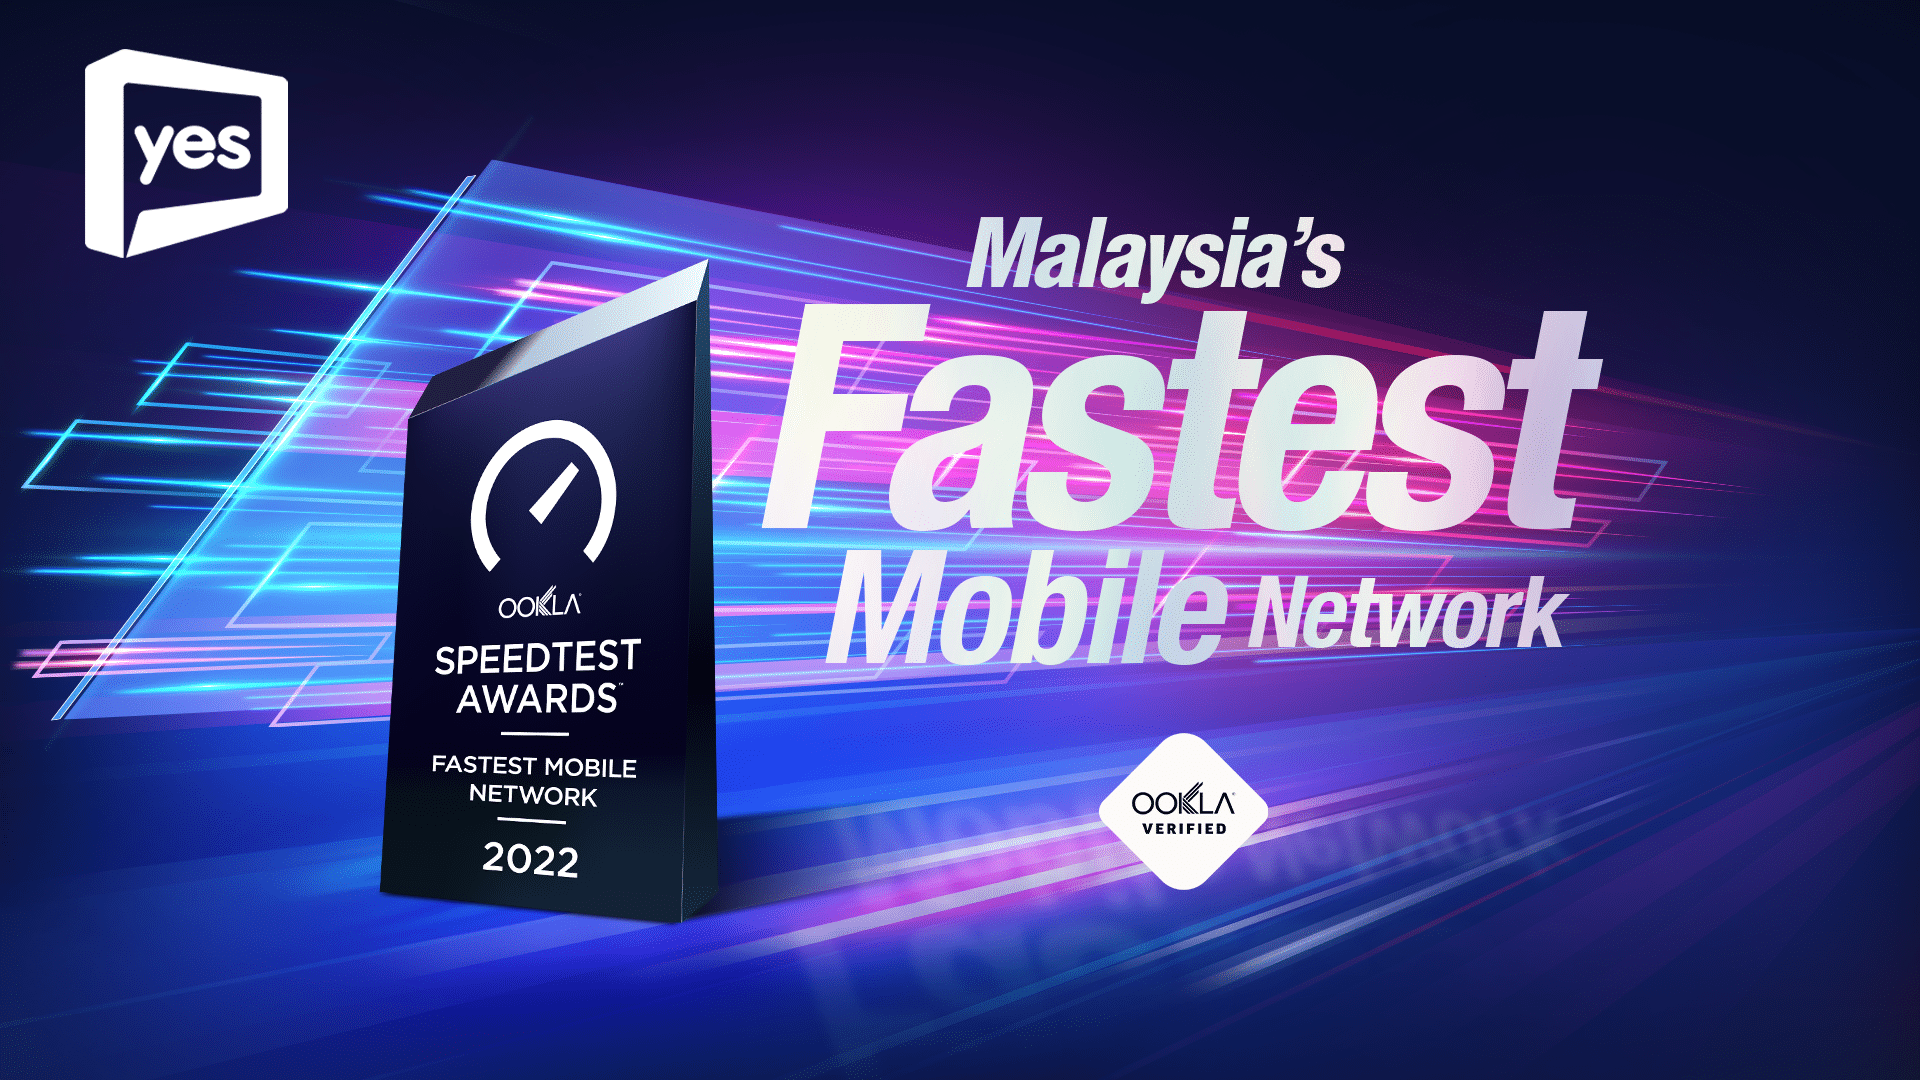 Yes 5G Crowned Ookla Speedtest Awards As Malaysia's Fastest Mobile Network